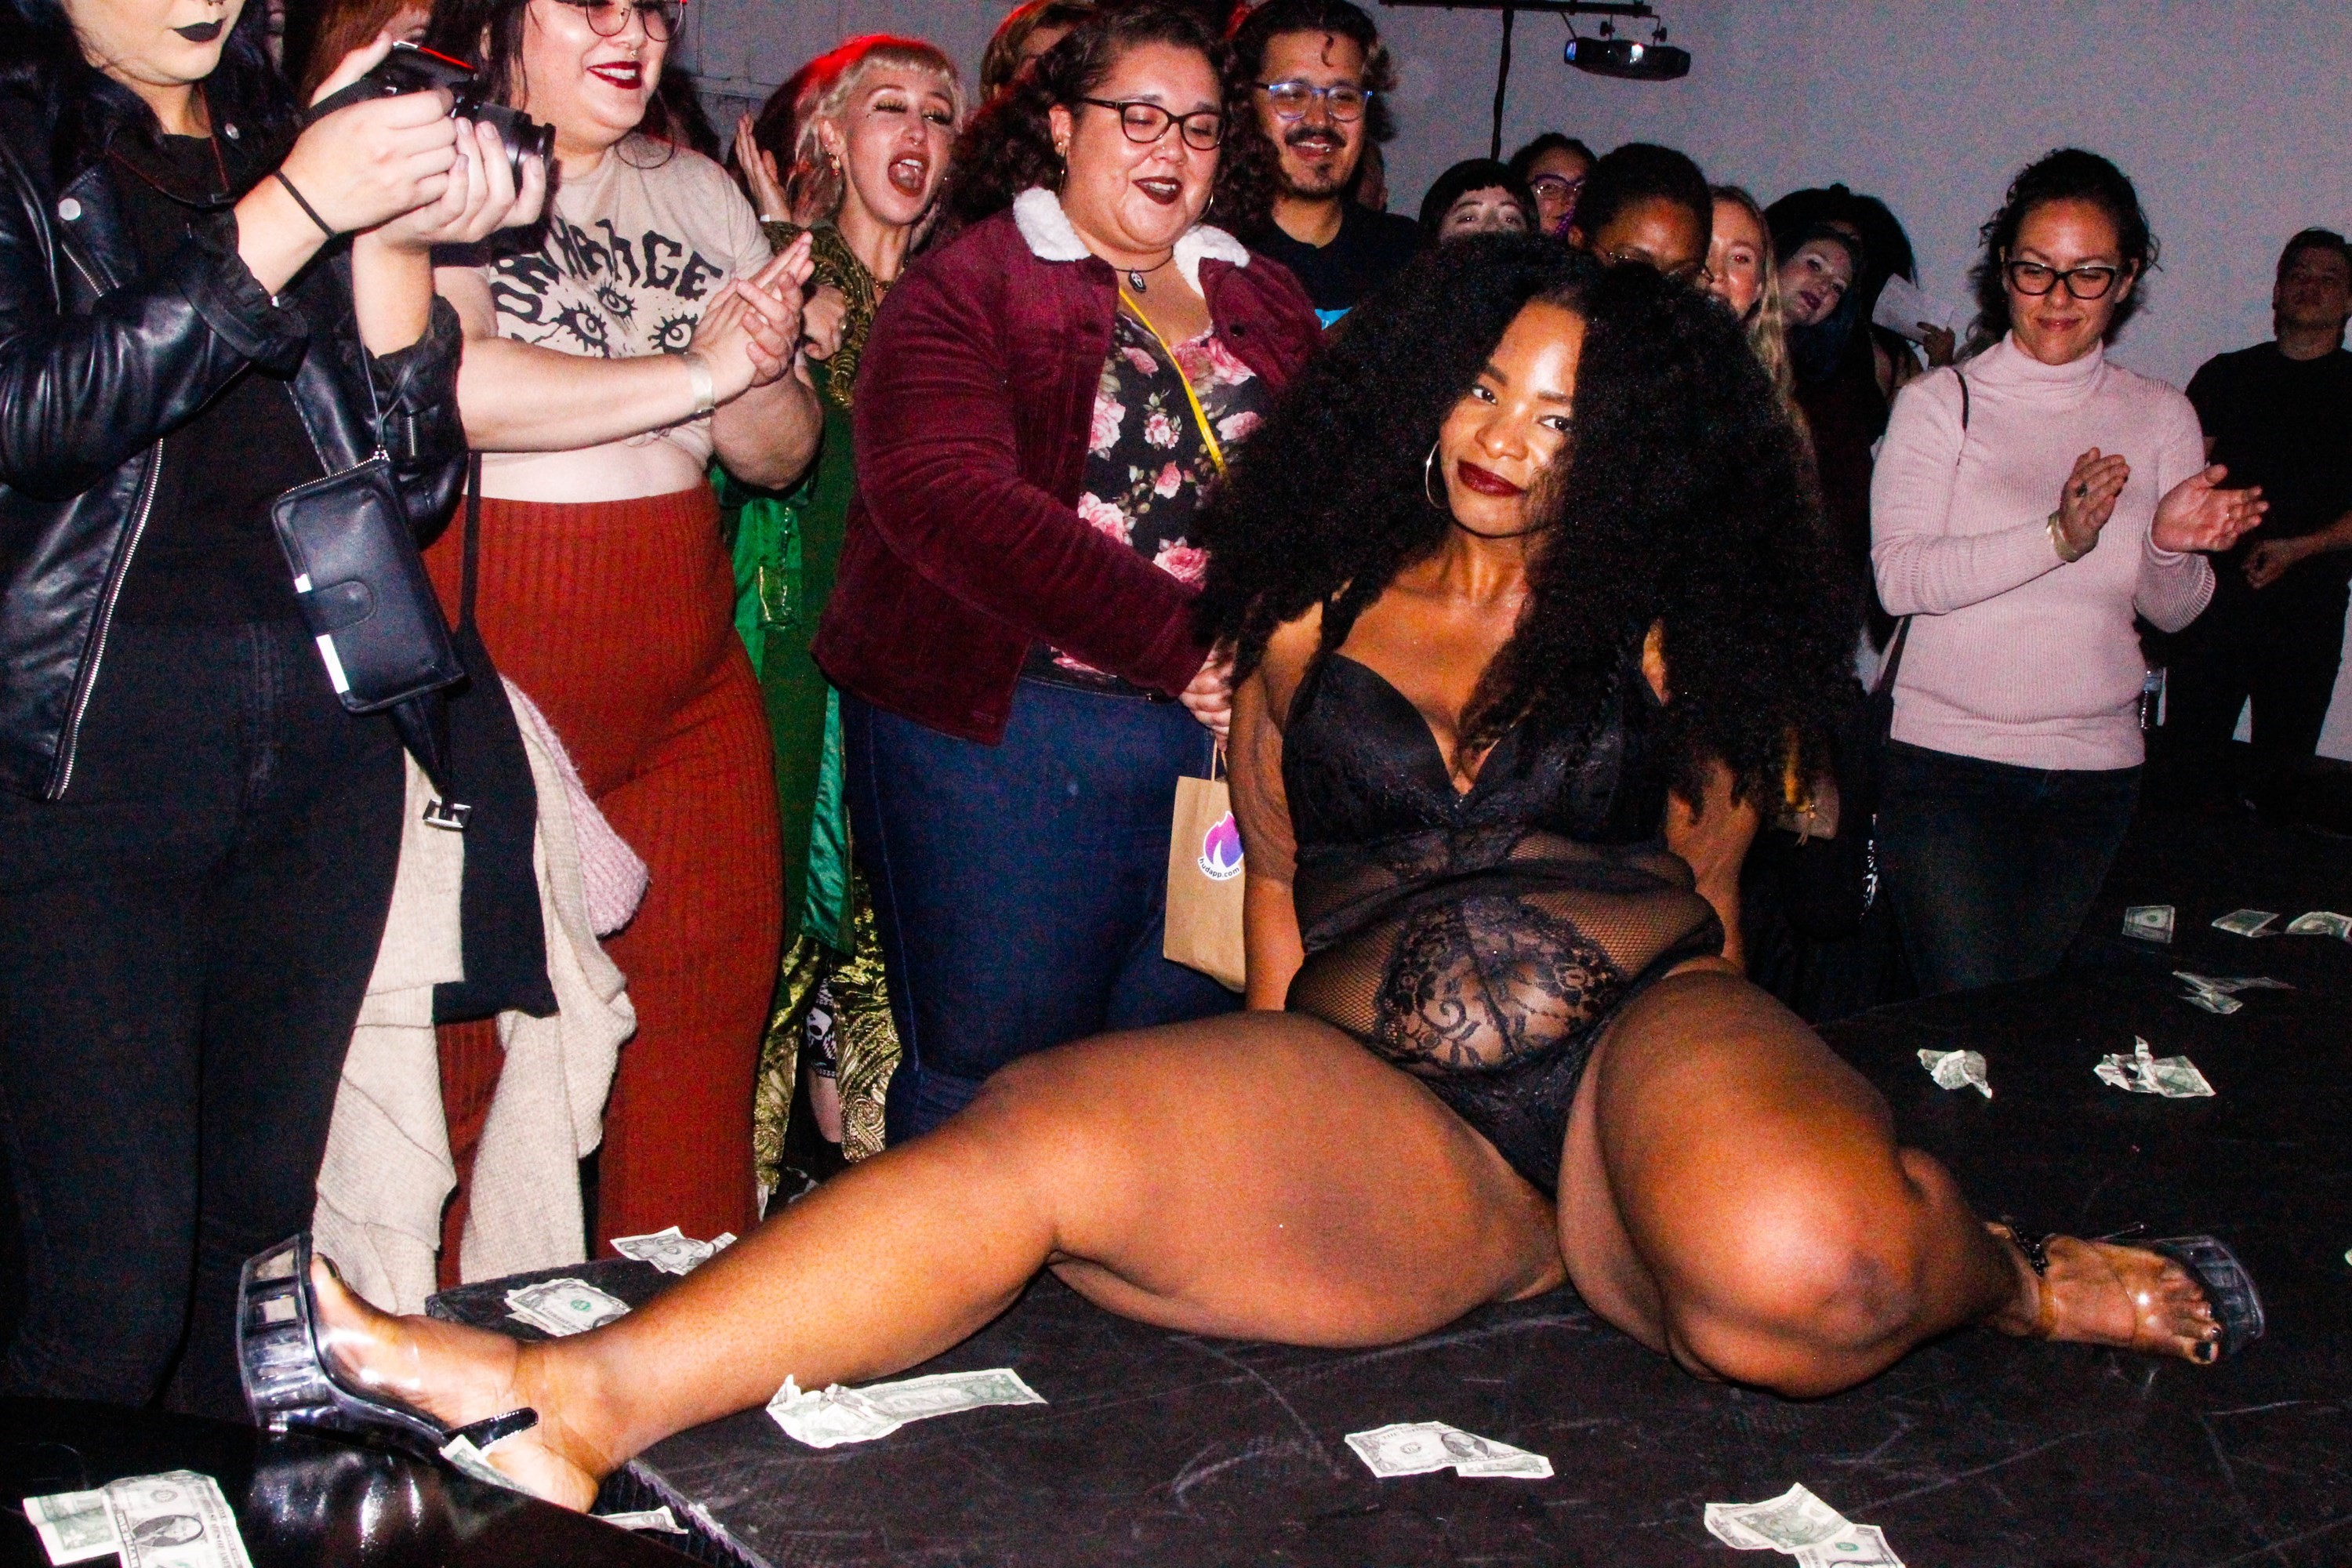 The body positive LA strip show founded by plus size women Dazed image